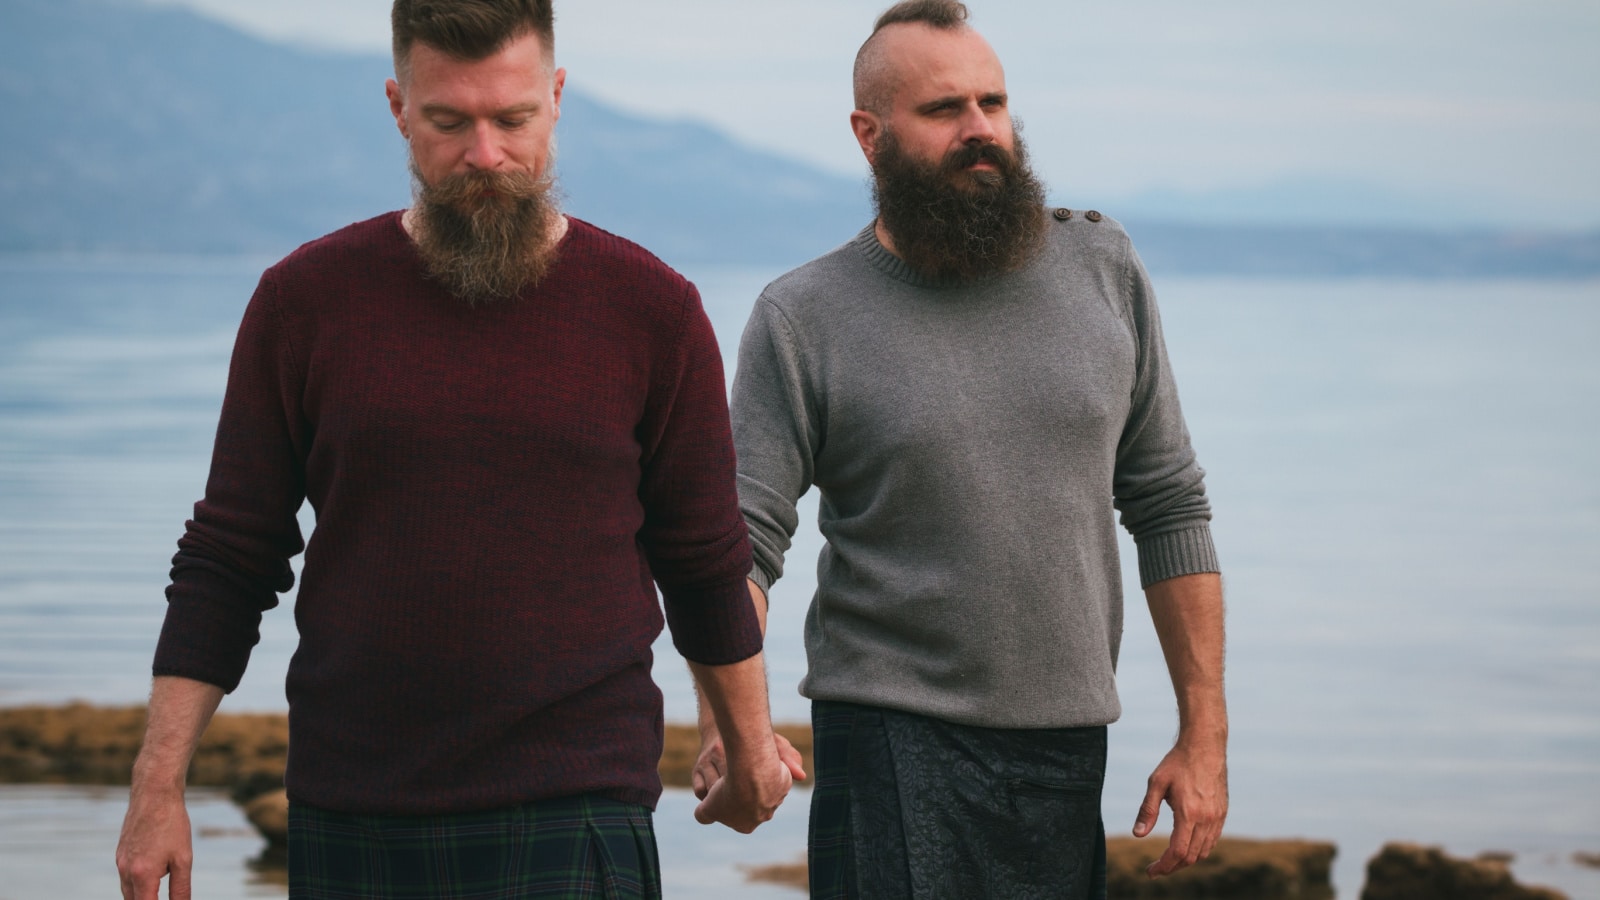 Fashionable gay couple in kilts holding hands while walking by sea side. Long beard male on the beach, serious faces, overcast day.